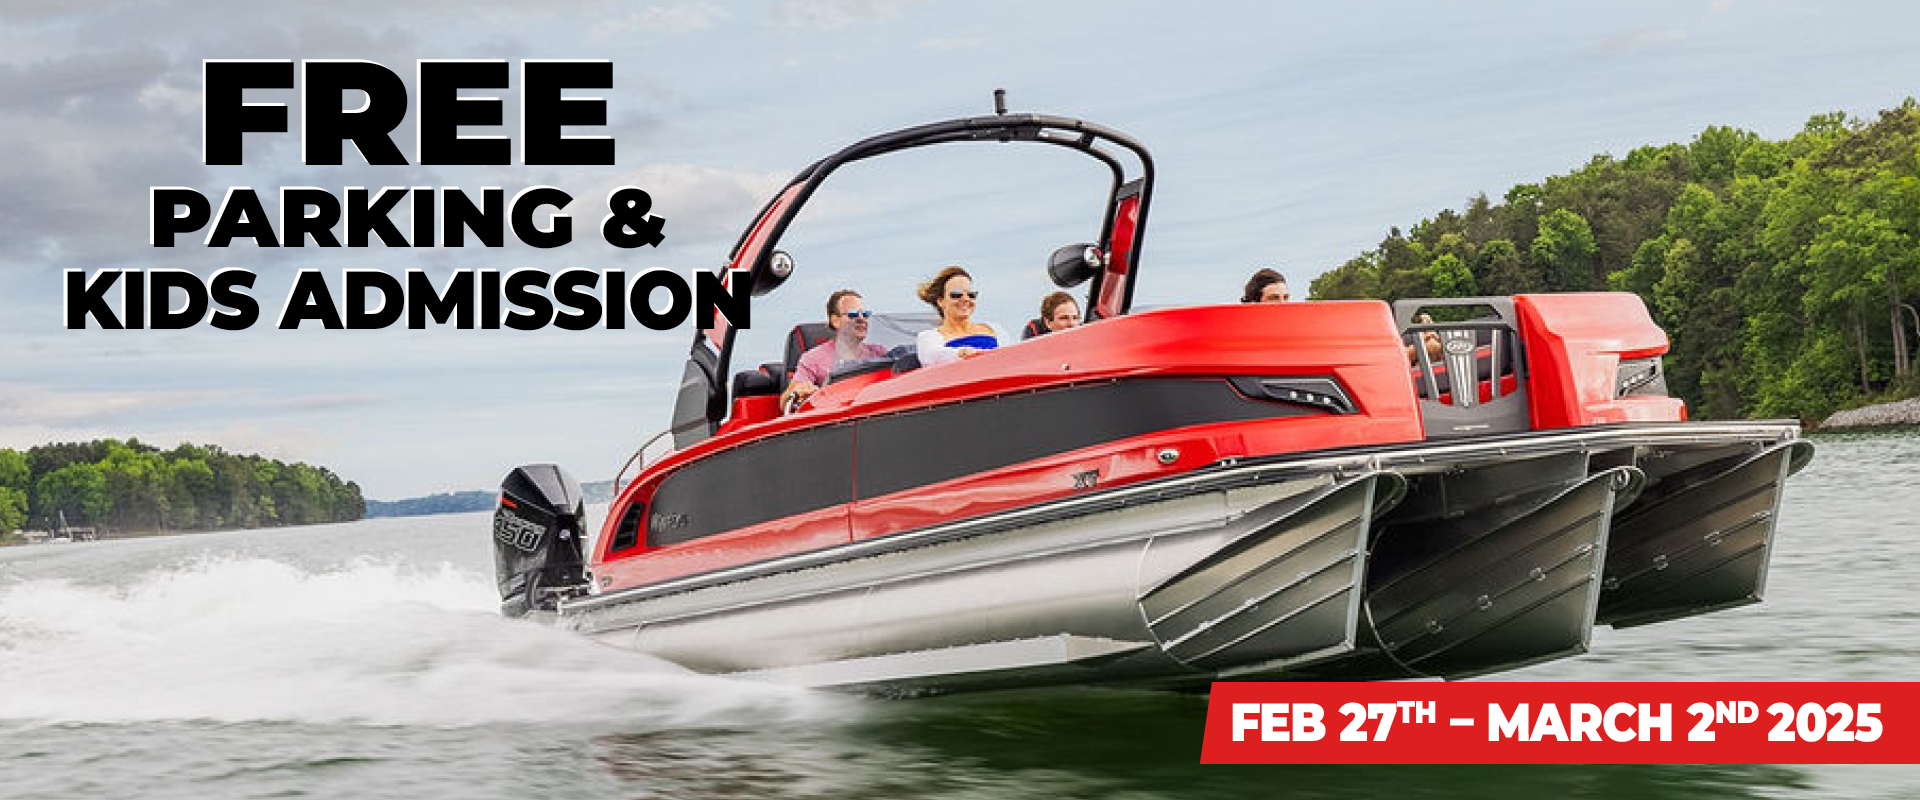 Free parking and kids admission at the boat show